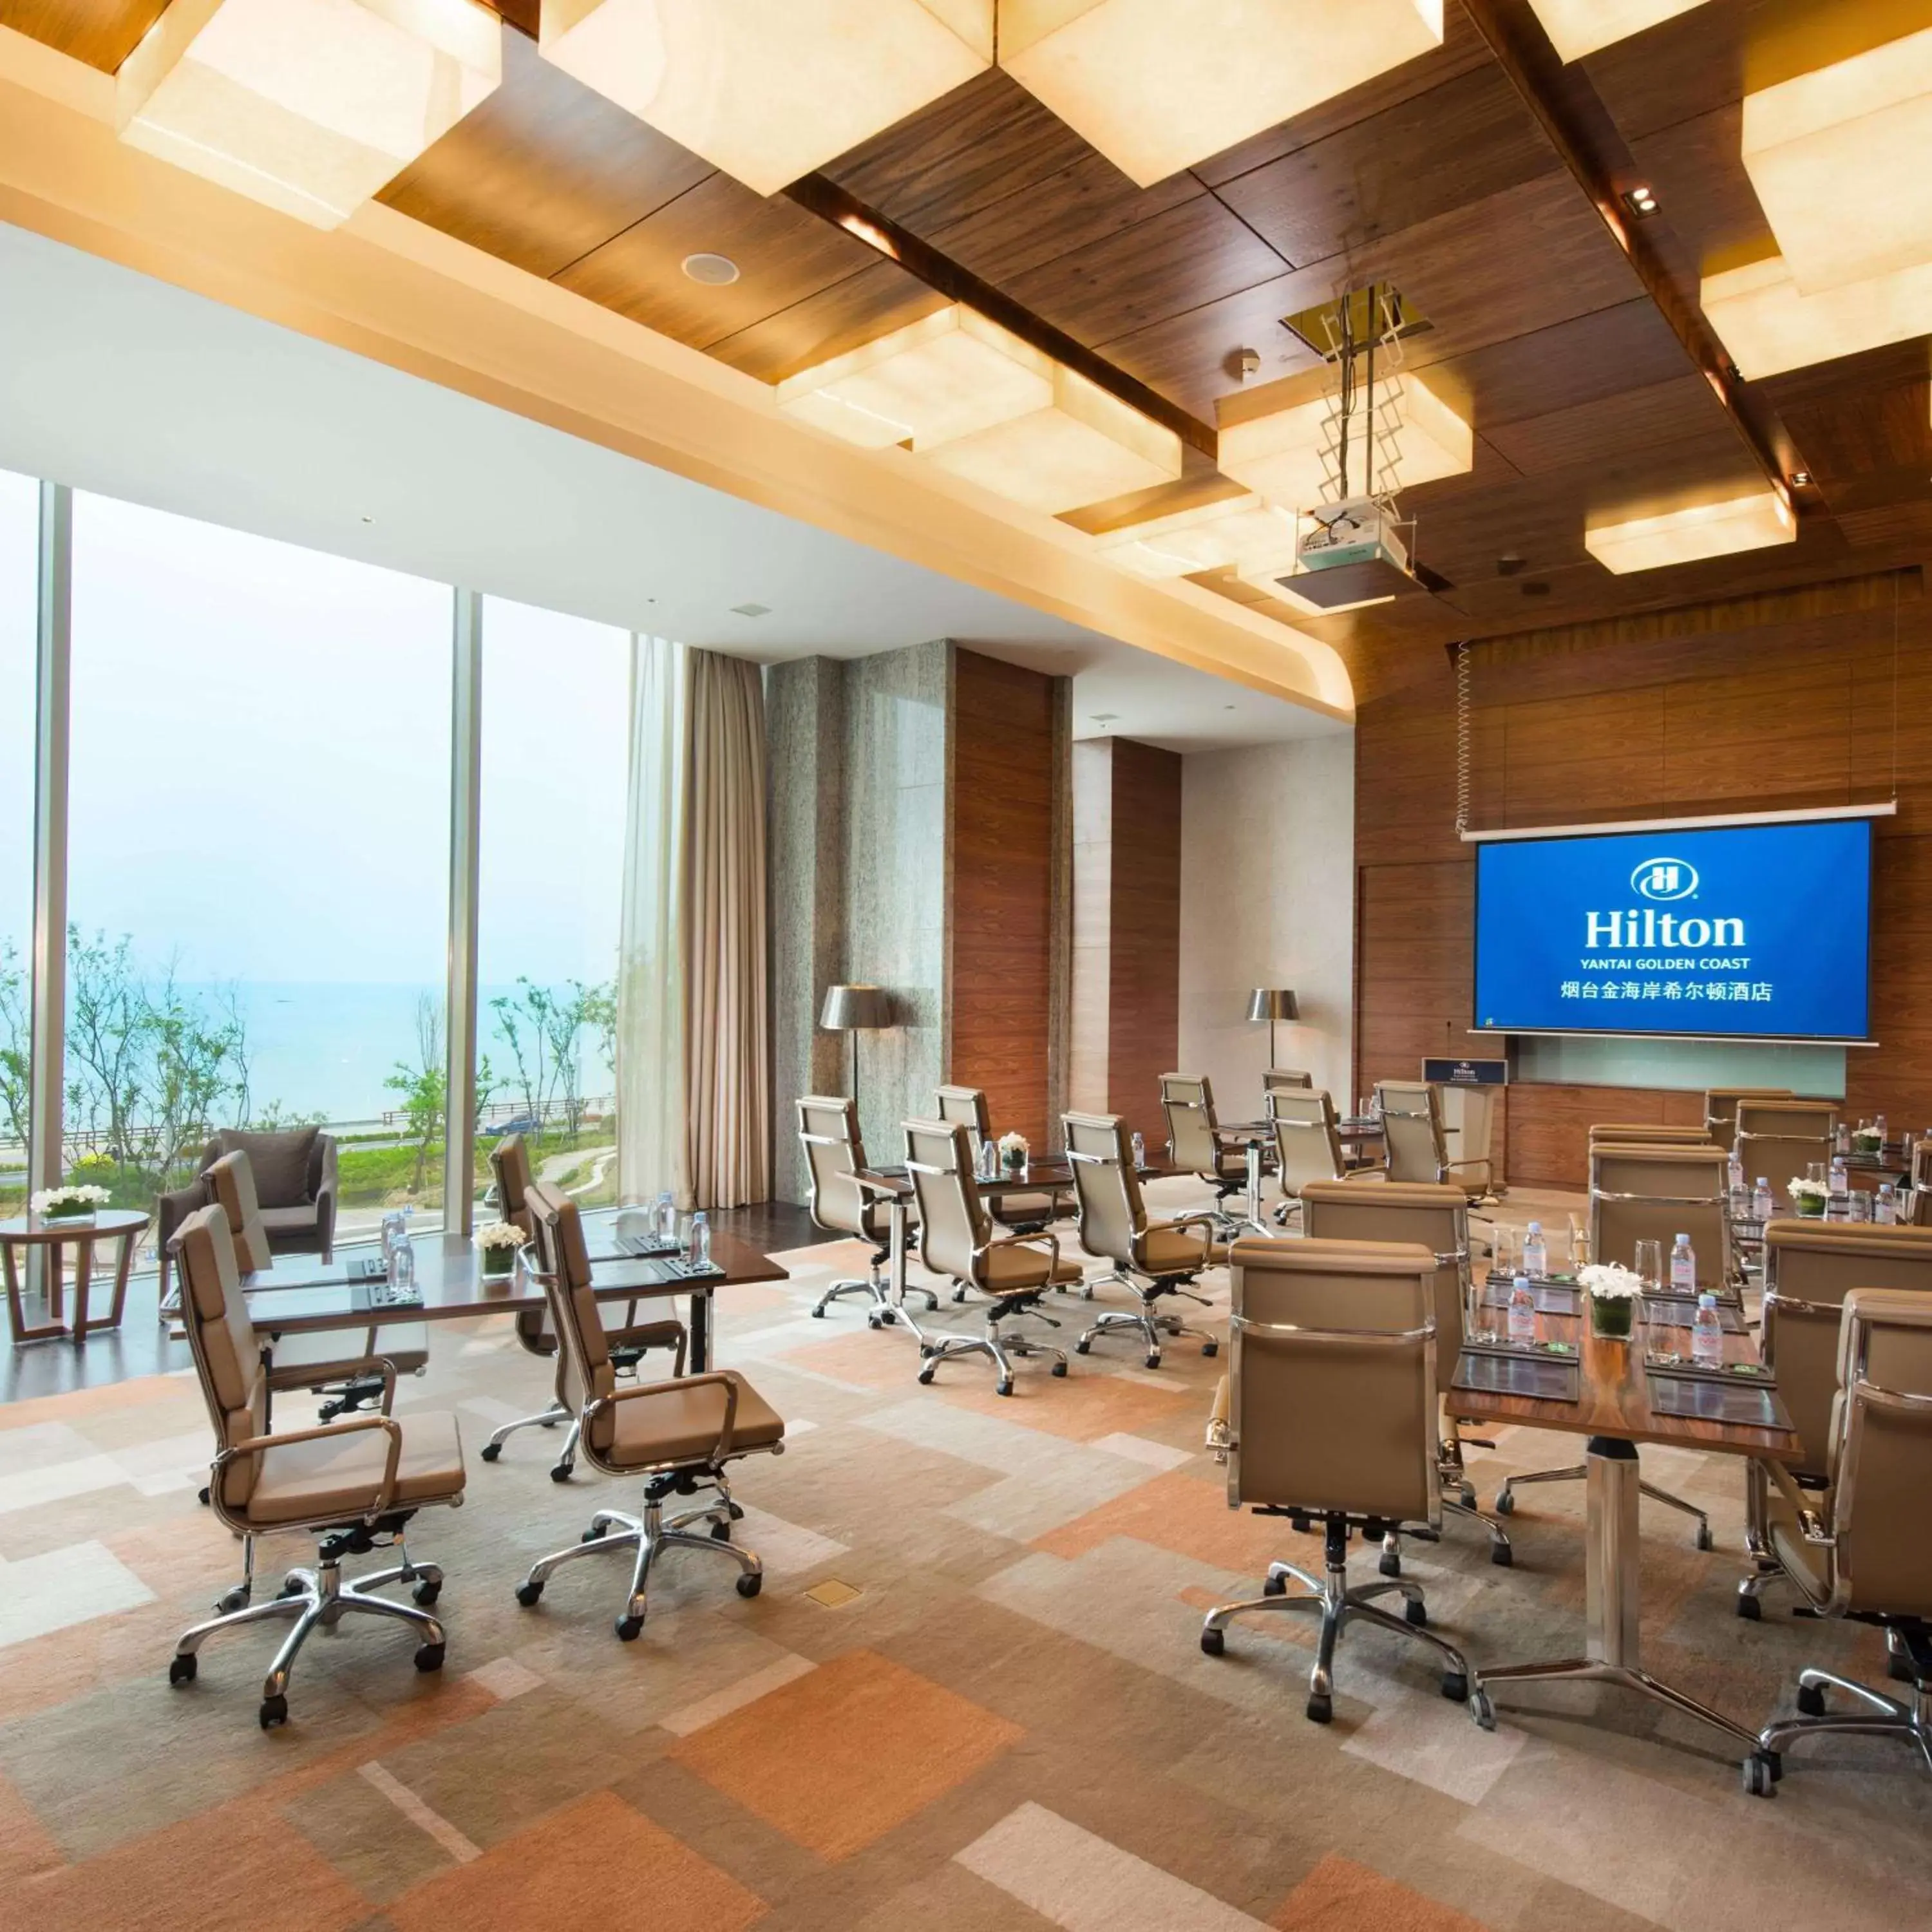 Meeting/conference room in Hilton Yantai Golden Coast